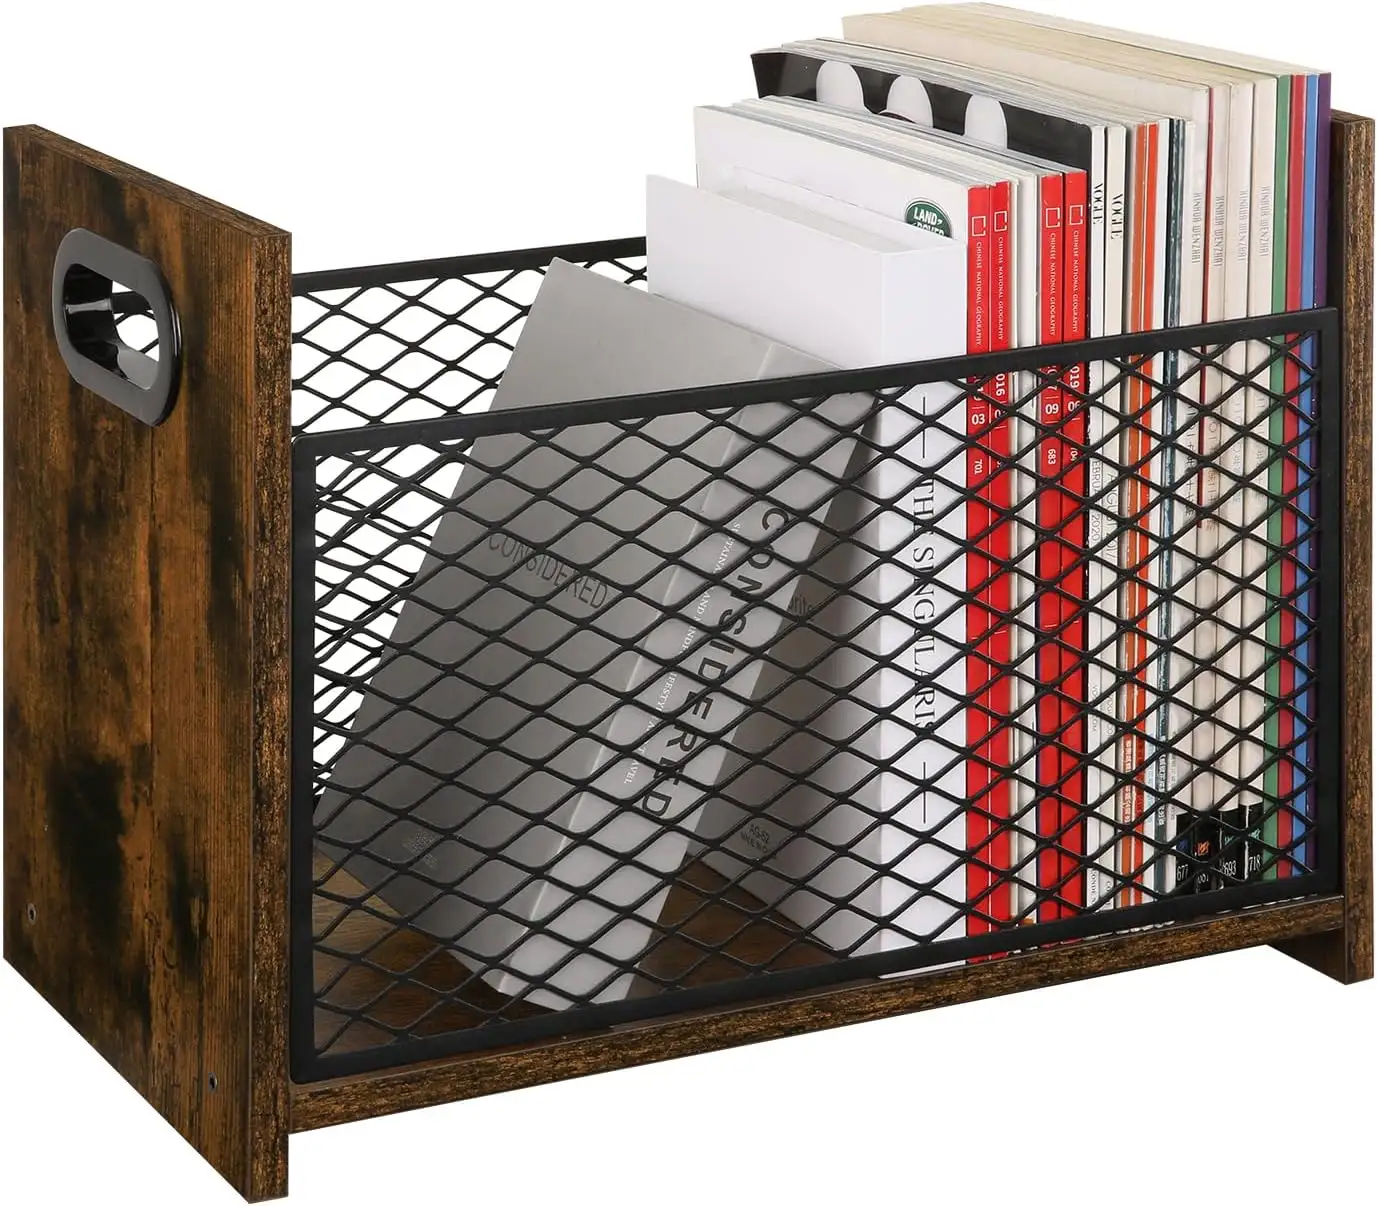 Letters Books Newspapers storage Farmhouse File Storage Basket Magazine Holder Magazine Rack for Desktop and Home Office